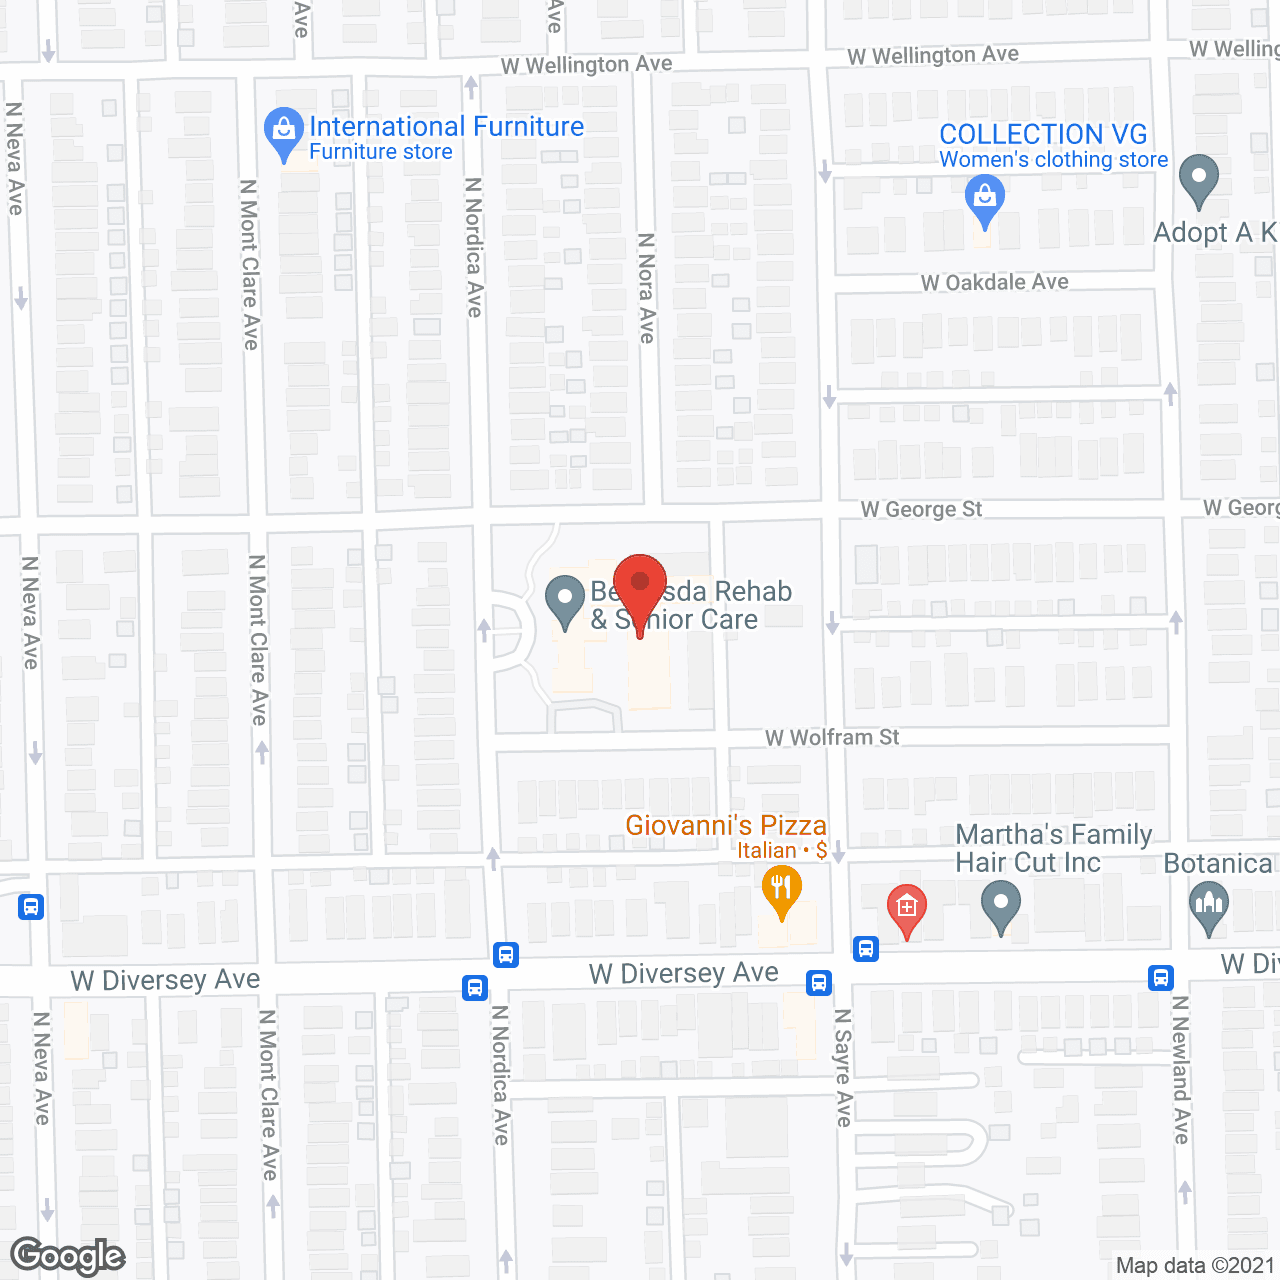 Bethesda Rehab and Senior Care in google map